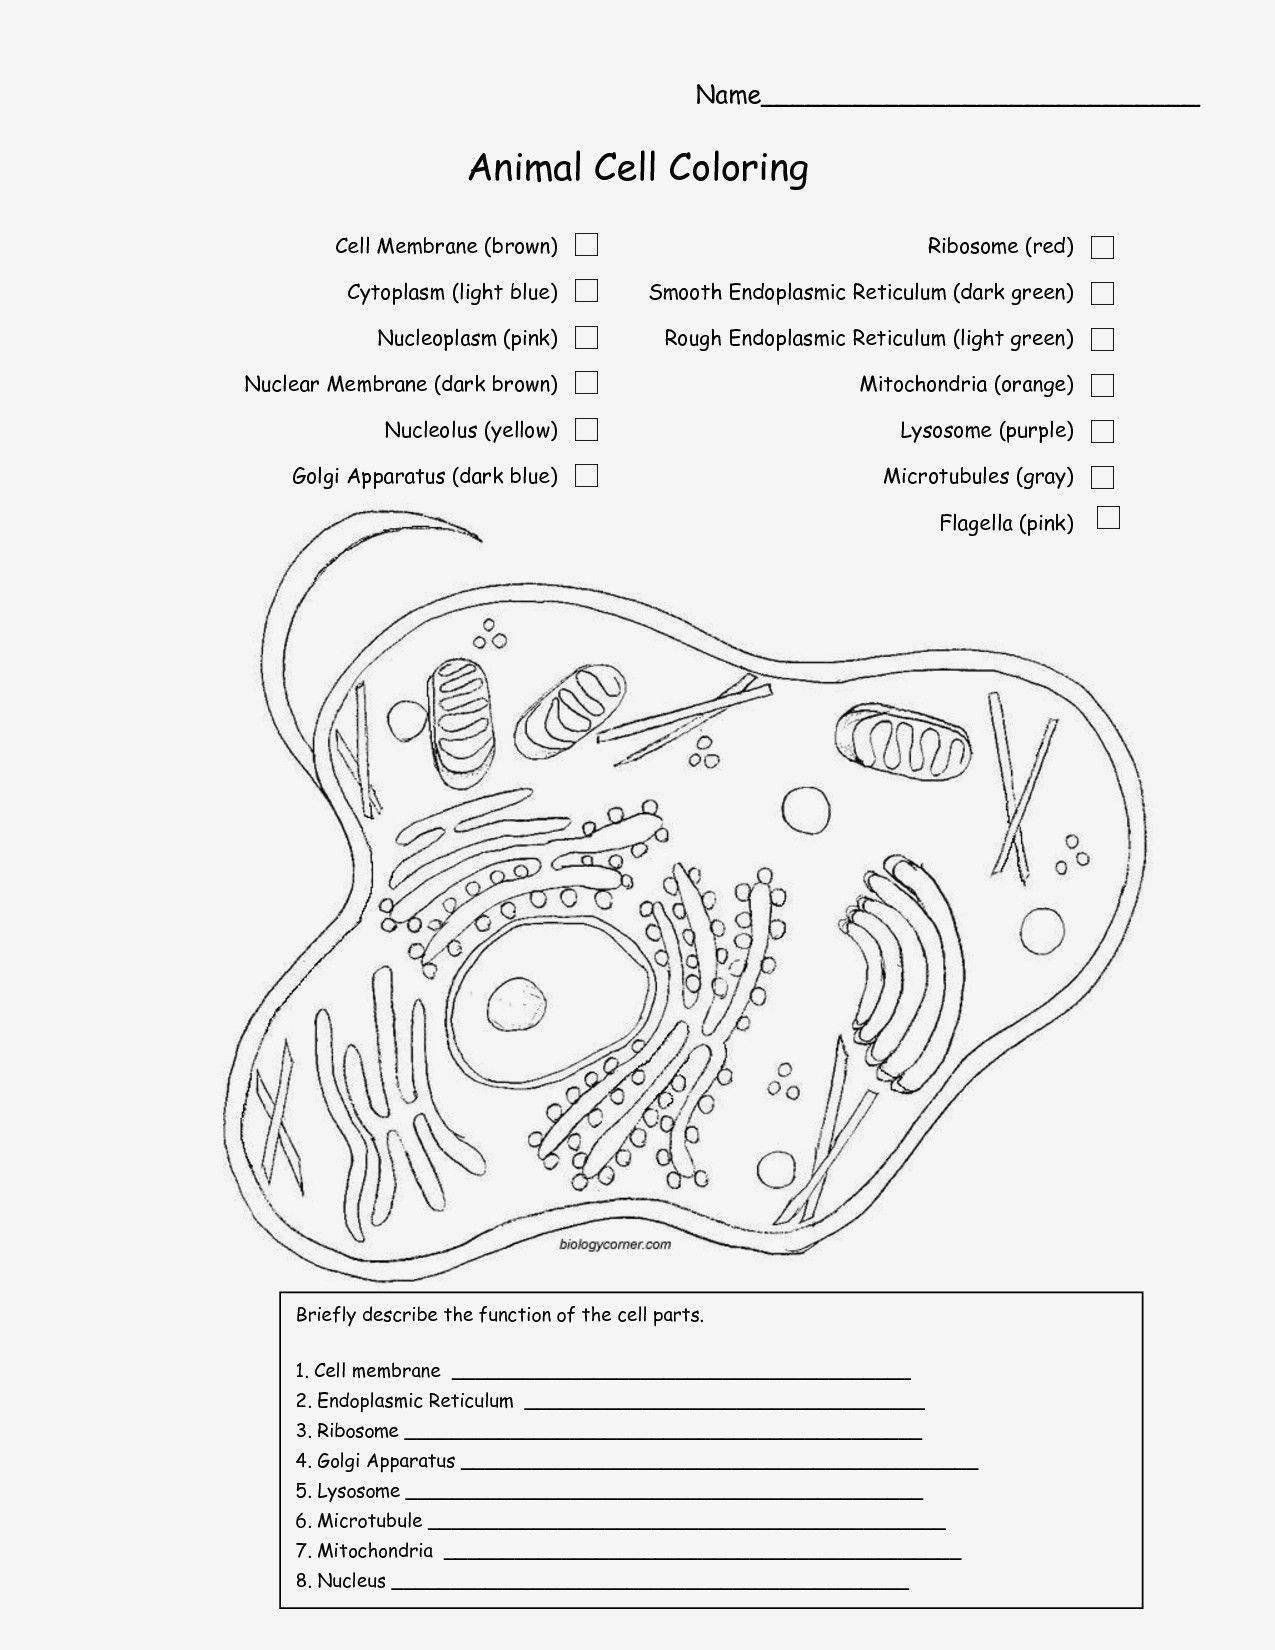 Cell Membrane Images Worksheet Answers Pin On Printable Blank Worksheet Template